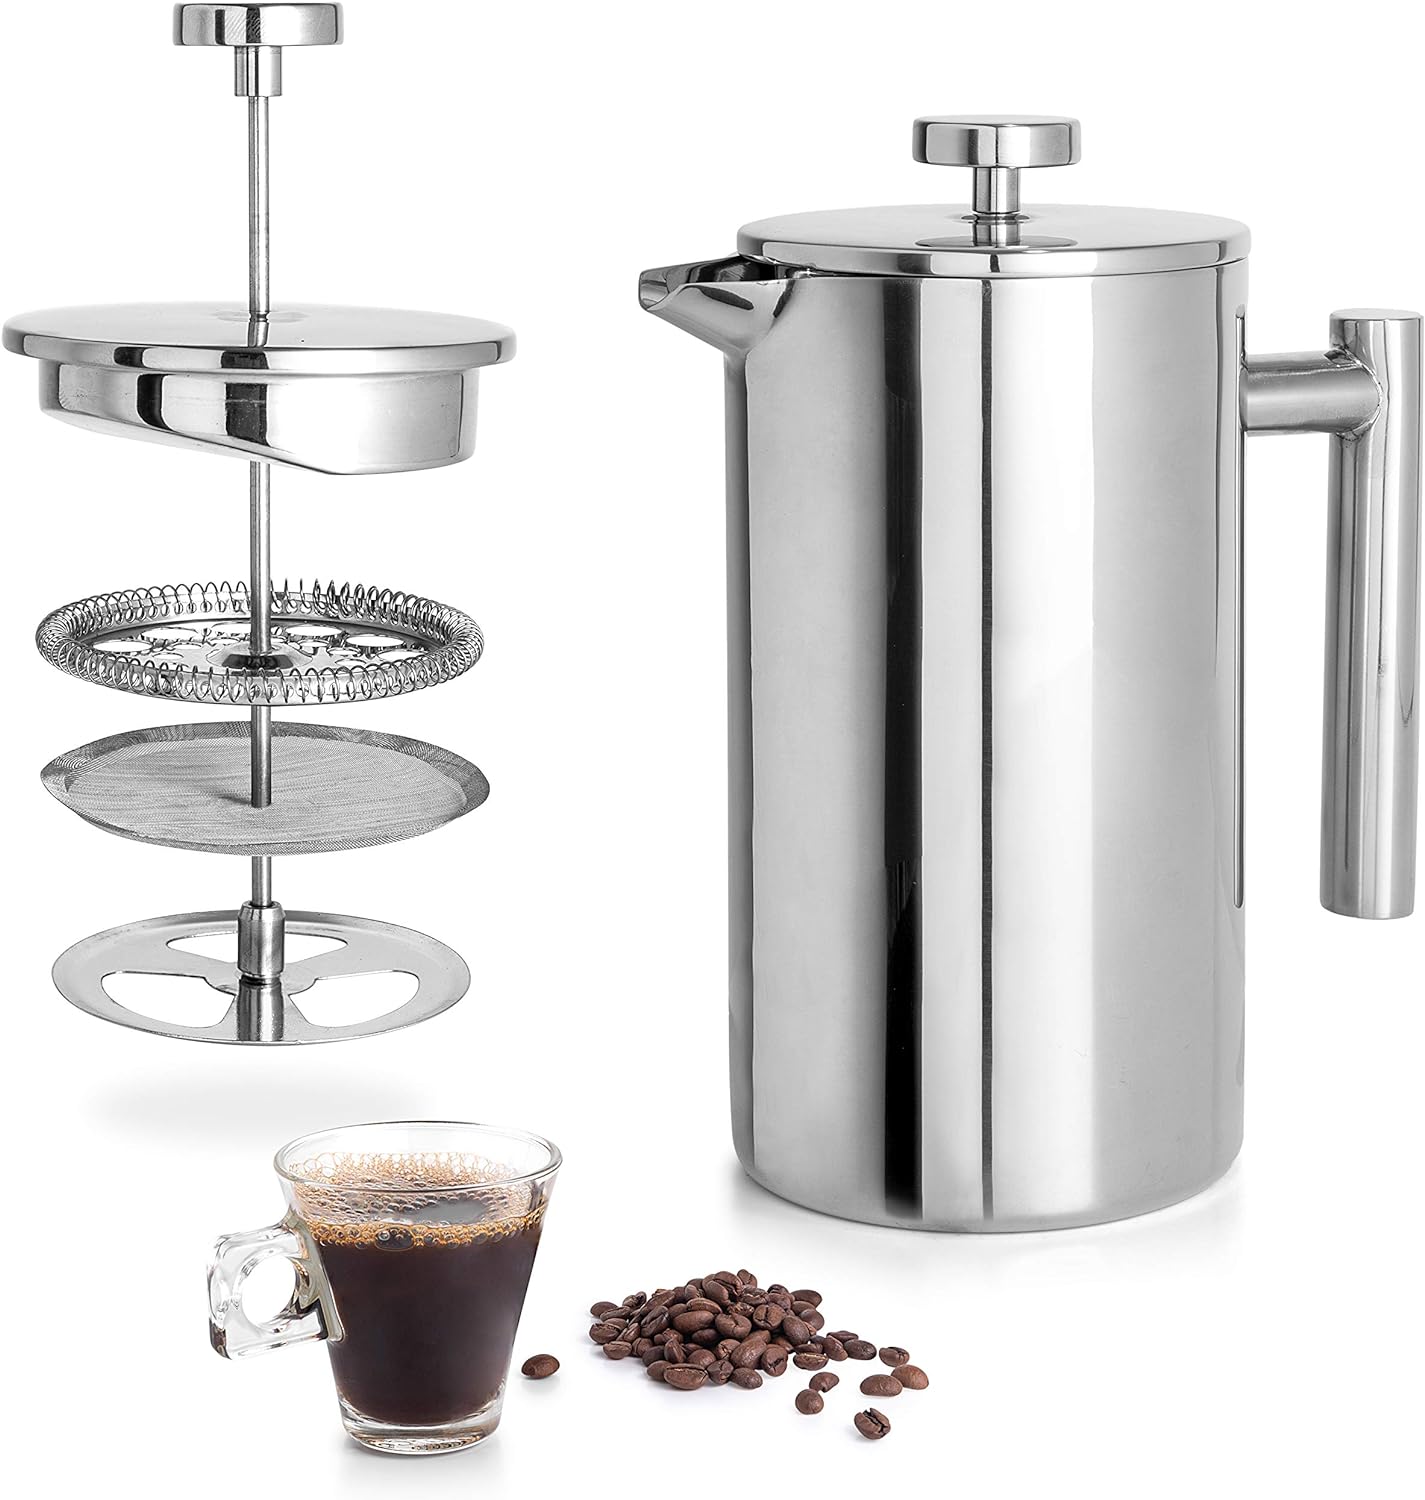 I absolutely love this cafetiere. It makes a solid 2 large mugs of perfect coffee with no grounds -- and I grind mine quite fine. It keeps the coffee warmer than plastic or glass models, is easy to clean, well made, and looks fetchingly stylish sitting on my desk at work. Highly recommended.